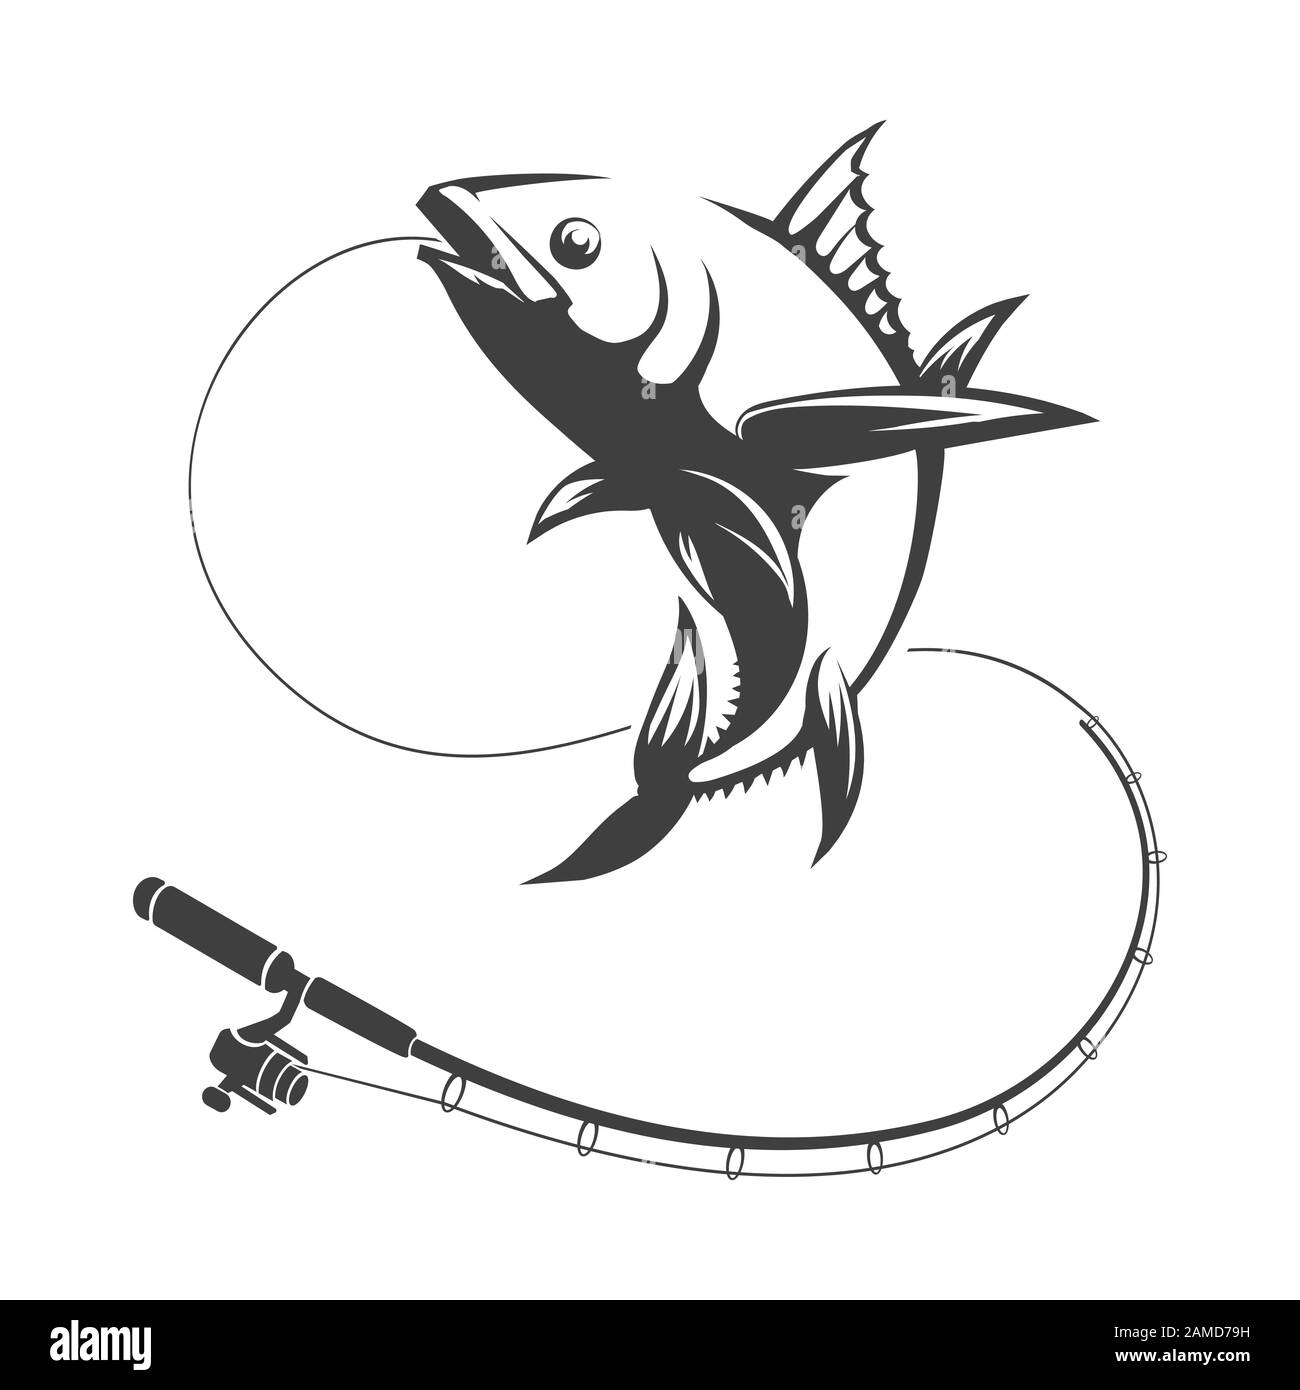 Fish rod Black and White Stock Photos & Images - Alamy